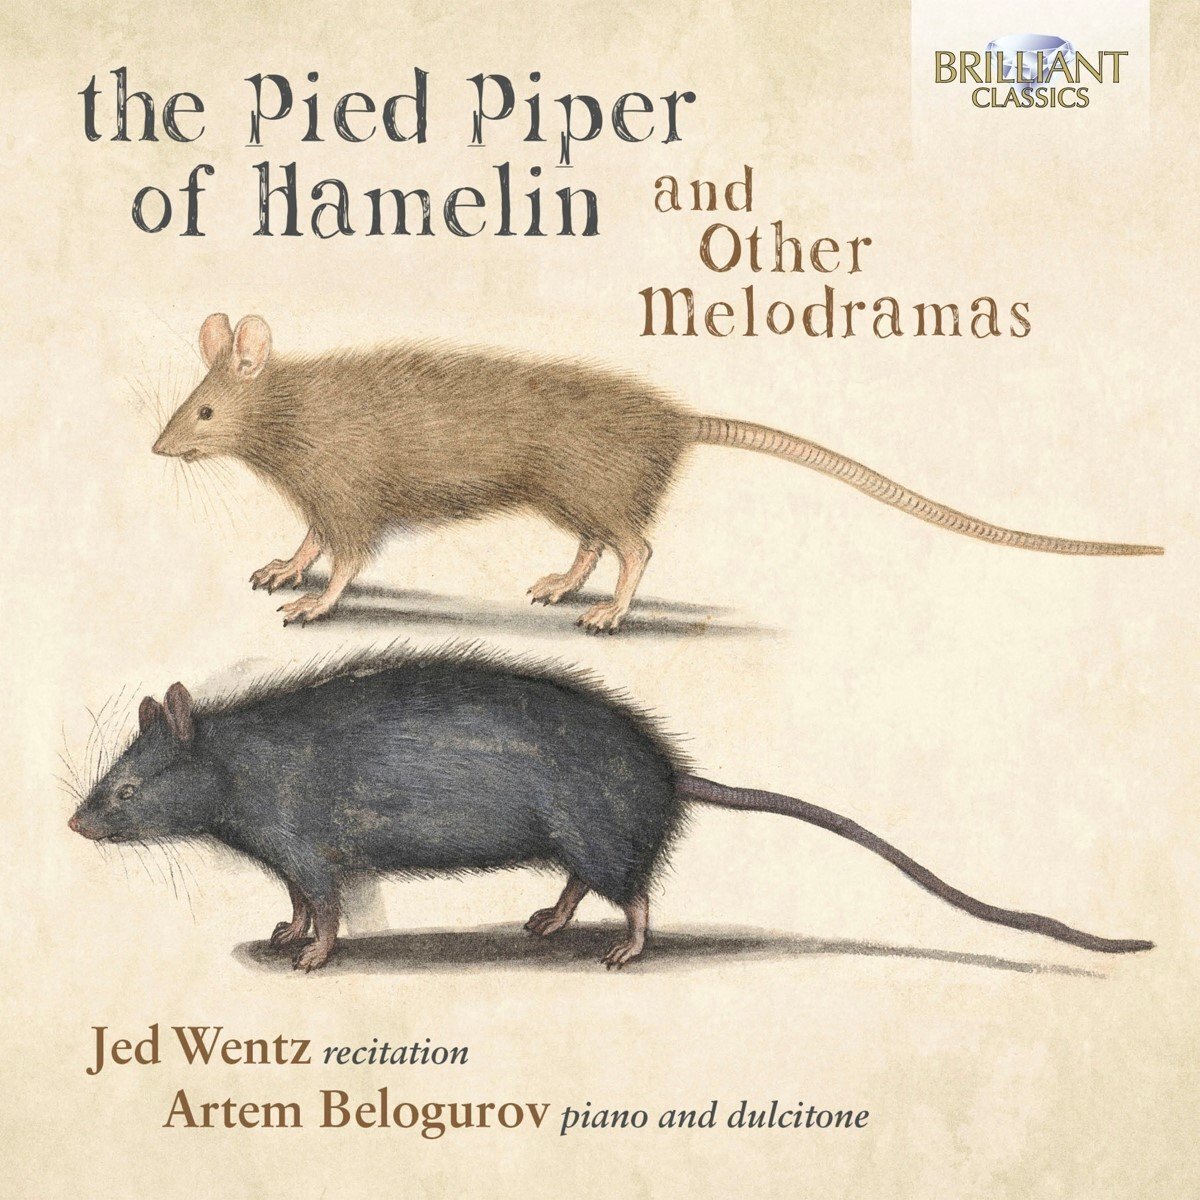 Brilliant Classics The Pied Piper of Hamelin and Other Melodramas